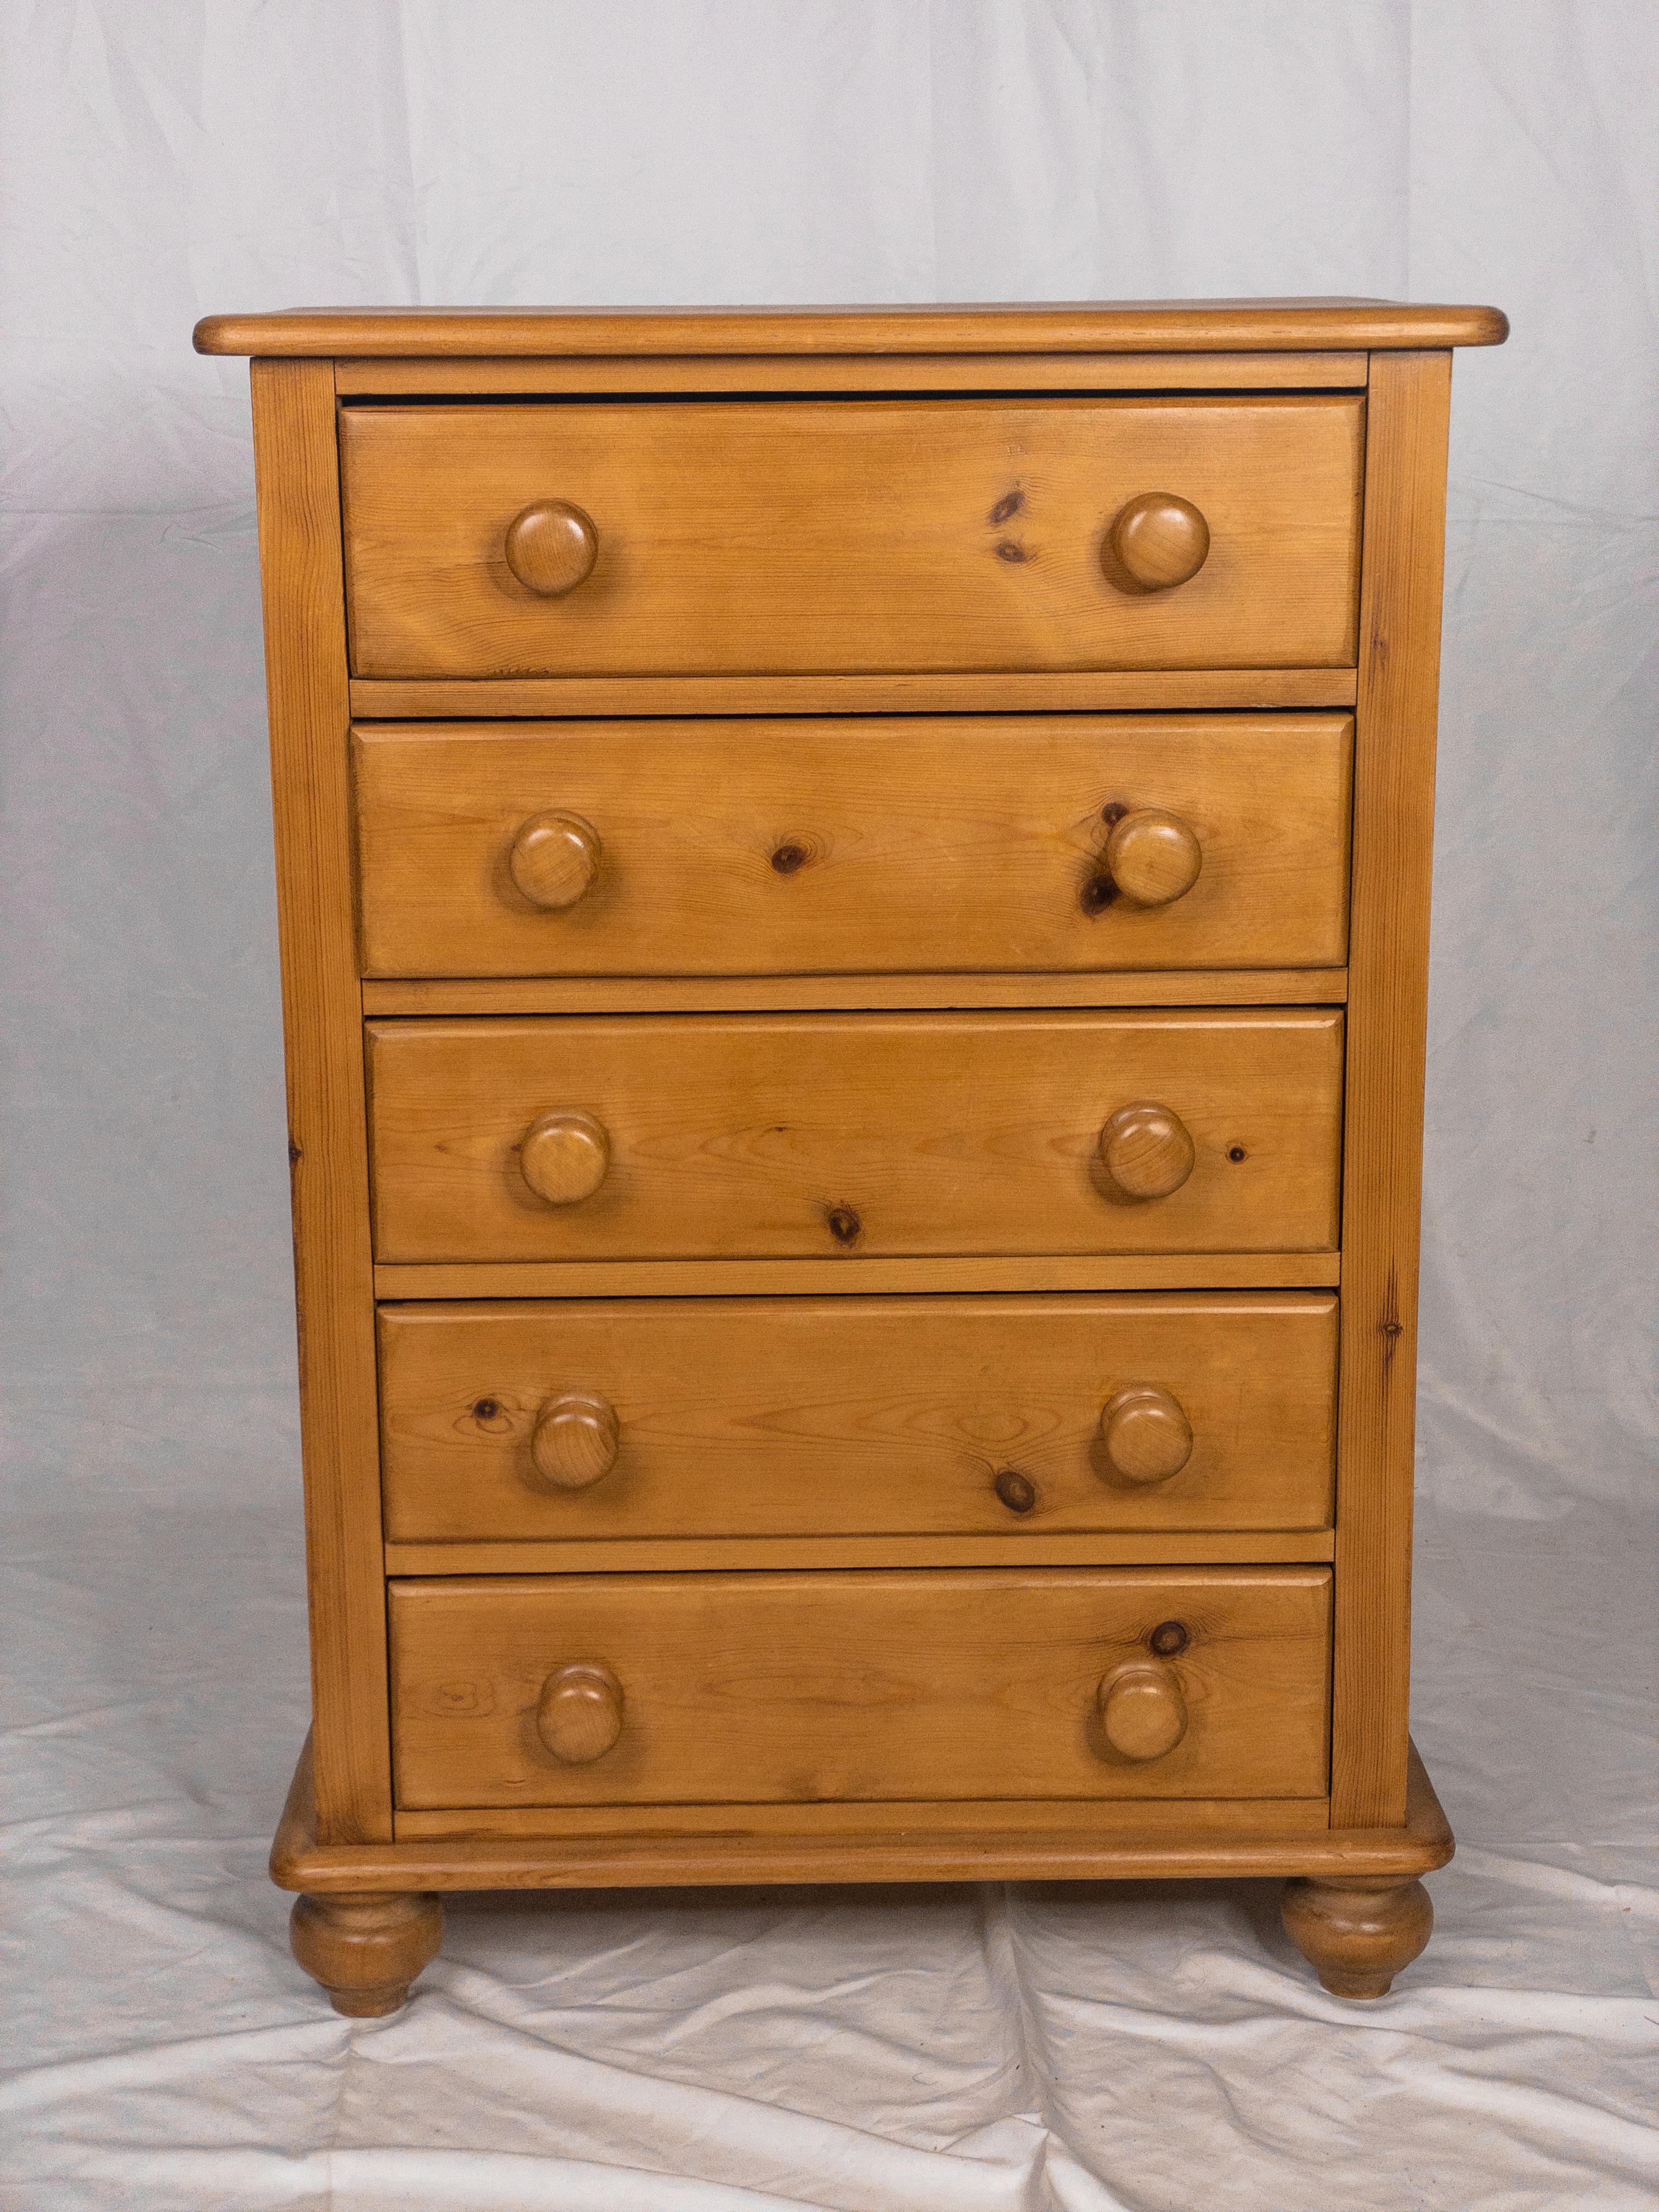 The 19th Century English Pine Chest of Drawers is a remarkable antique furniture piece that captures the essence of a bygone era. Crafted from solid pine wood, it bears the warm, aged patina that only time can impart, adding to its historical